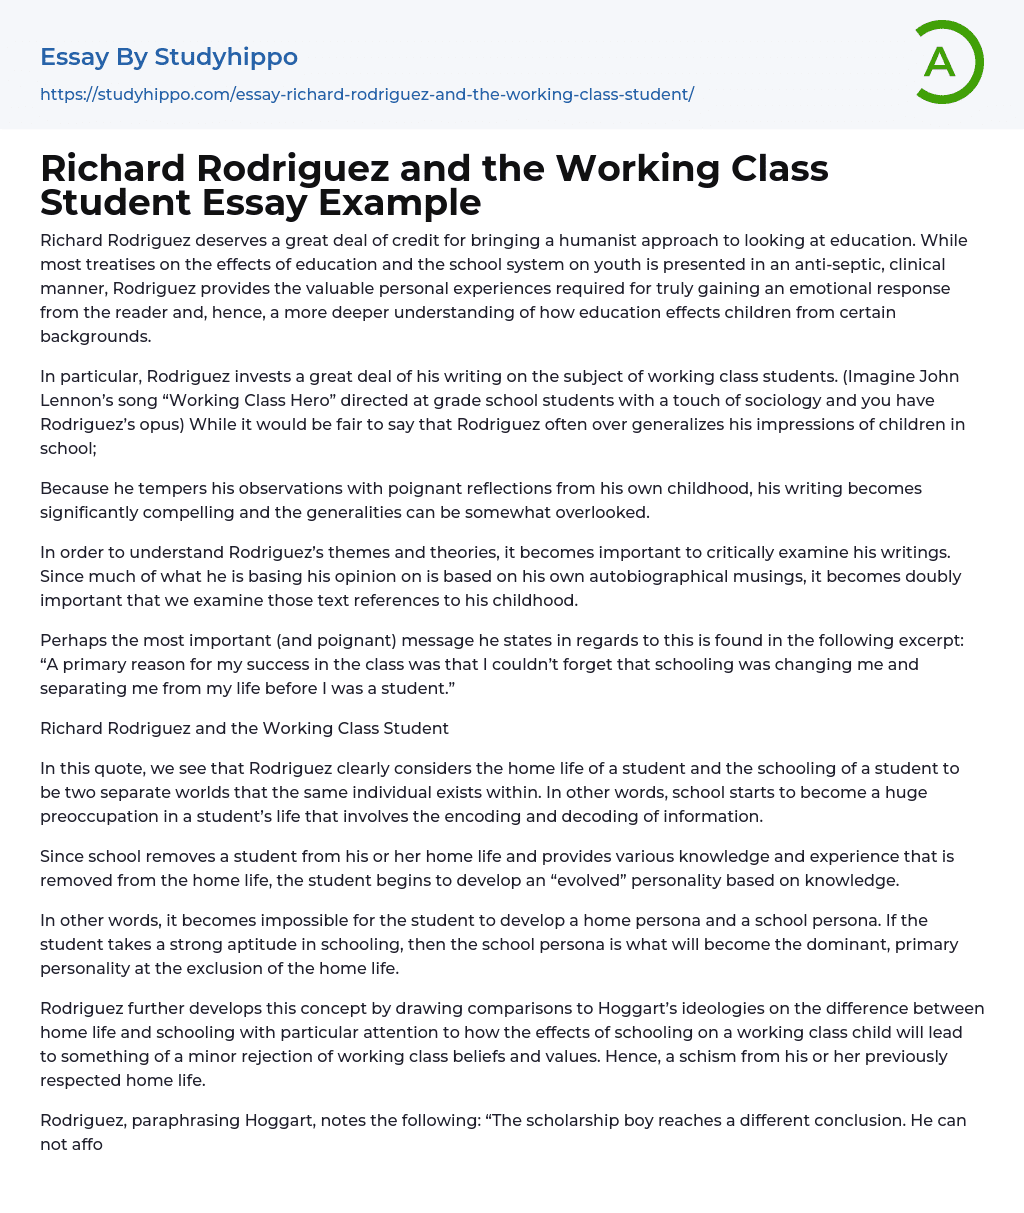 Richard Rodriguez and the Working Class Student Essay Example